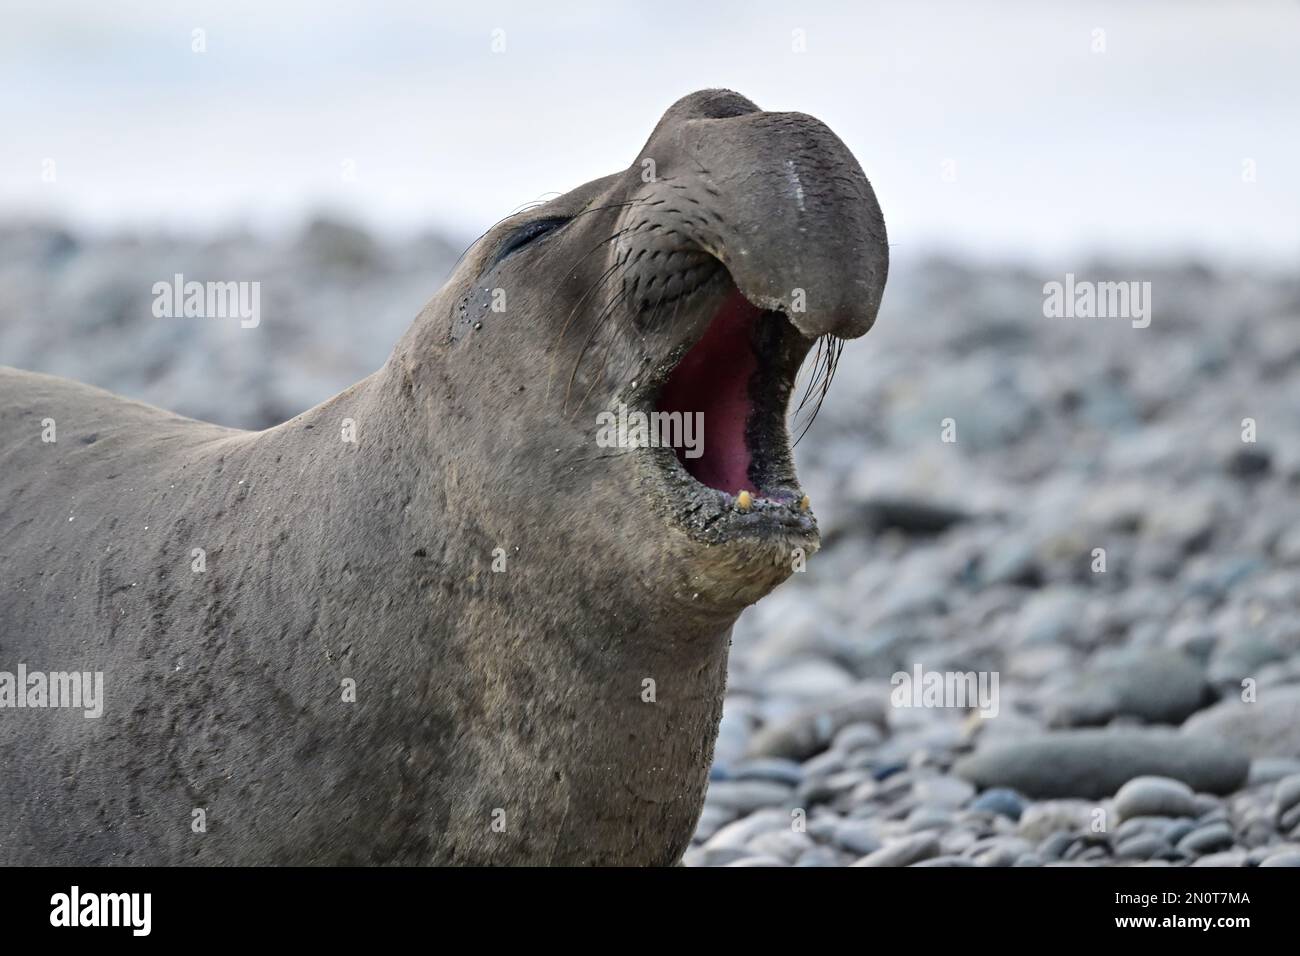 Northern Elephant Seal at Año Nuevo State Park Beach, California Stock Photo